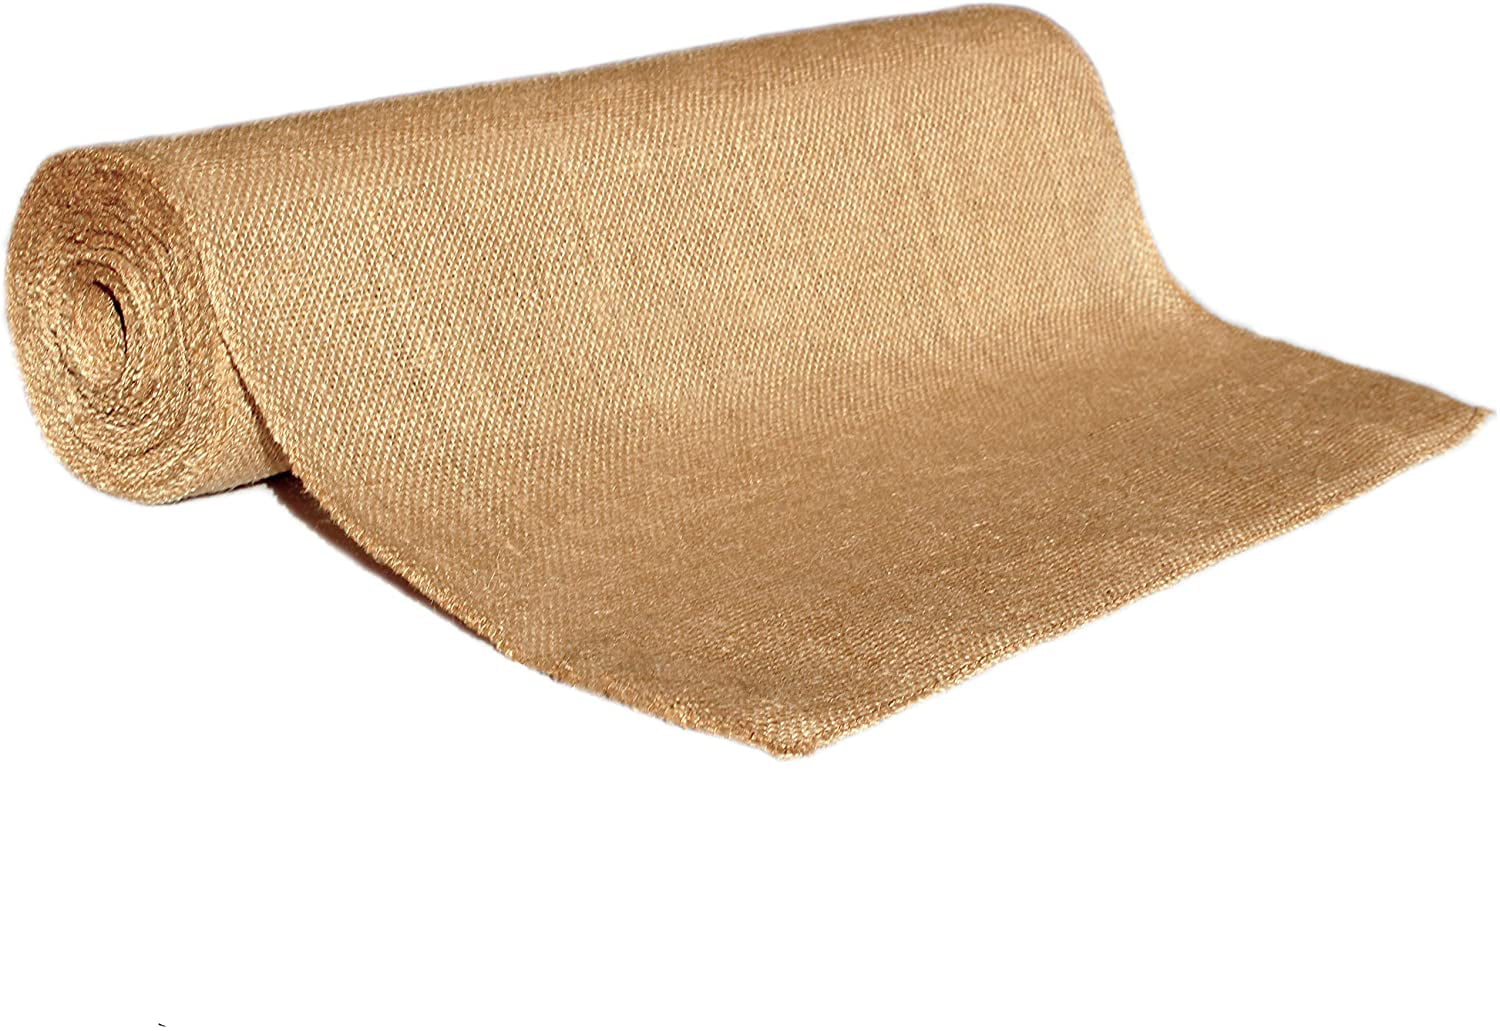 Crafts Decorate Without The Mess! Perfect for Weddings Placemat RichCraft 14 x 10yd NO-FRAY Burlap Roll ~ Table Runner Fabric with Finished Edges 